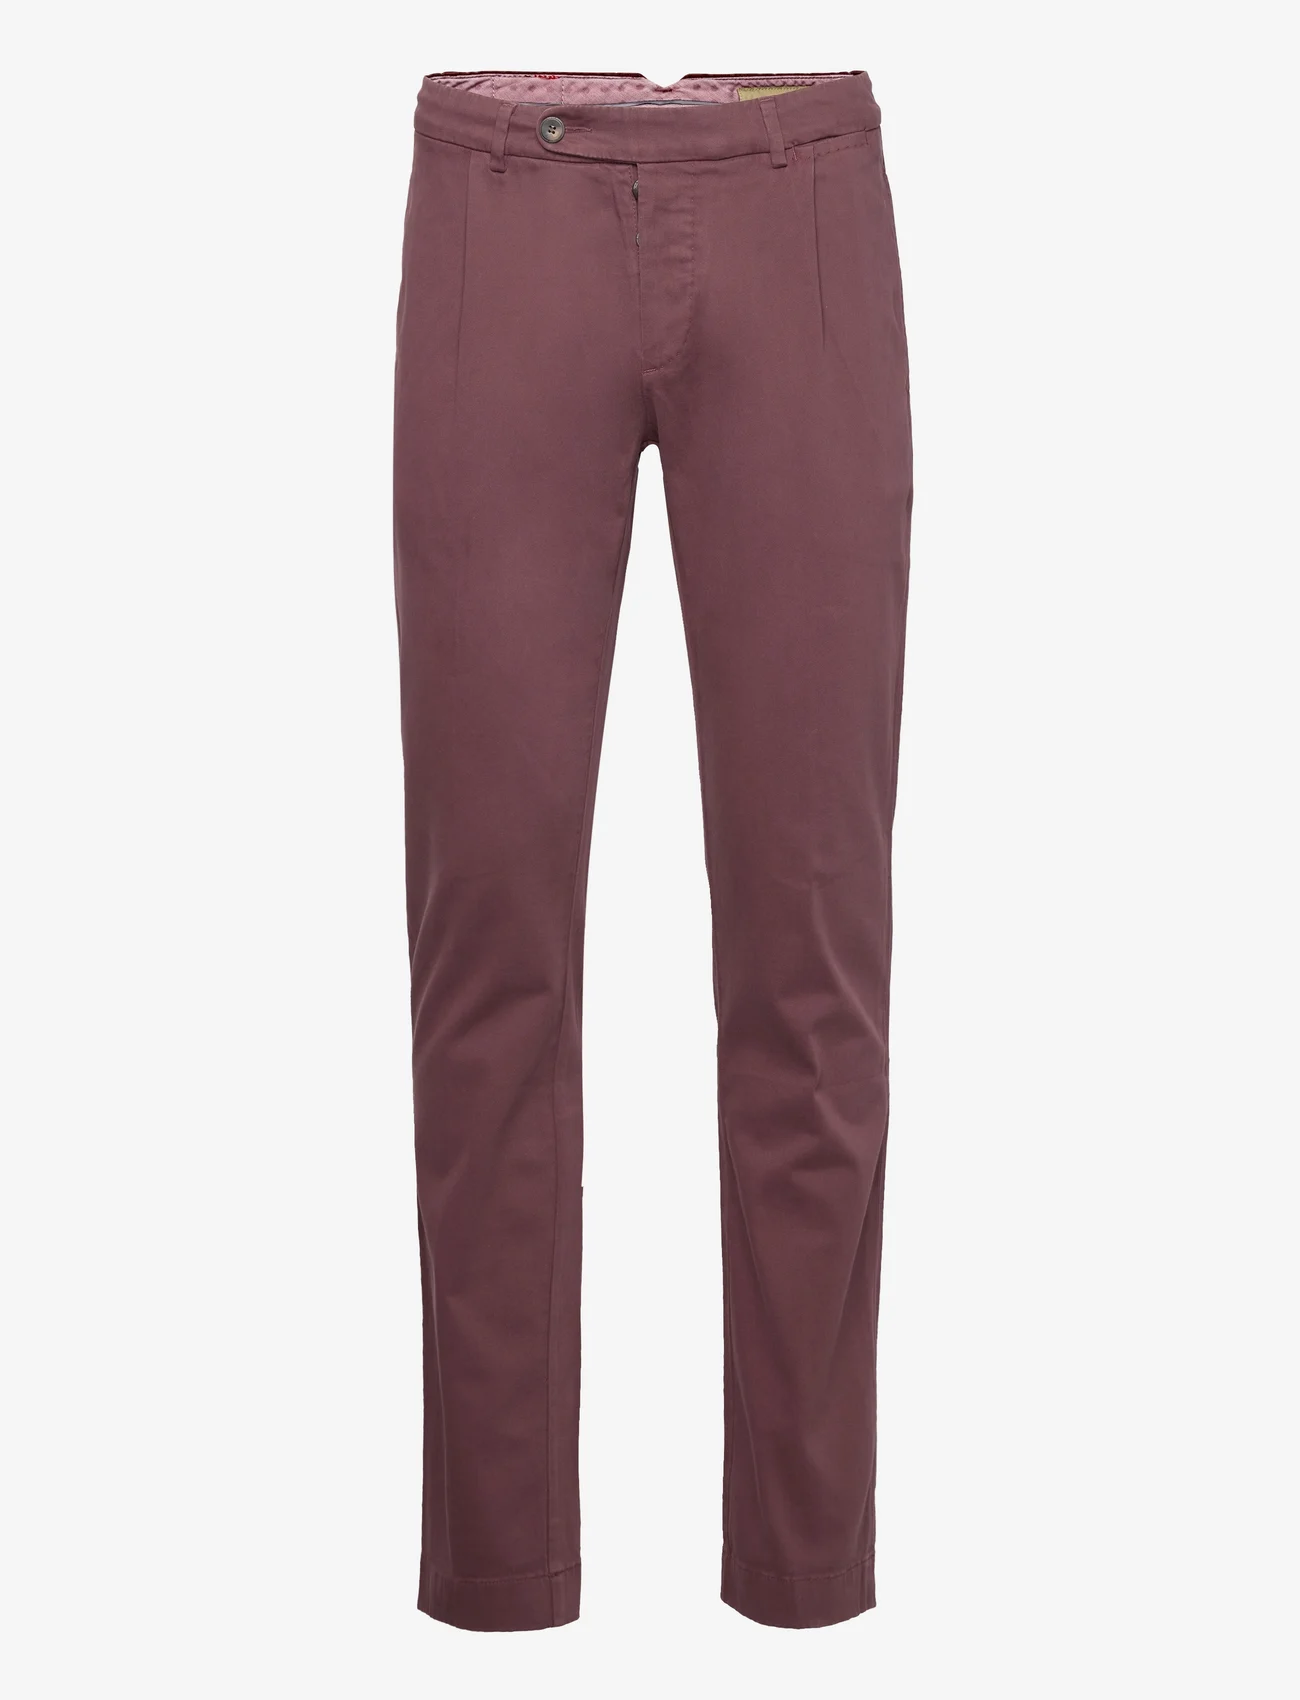 Jacob Cohen - SEMI CLASSIC COMFORT PPT STR SOLID - chino's - burgundy - 0